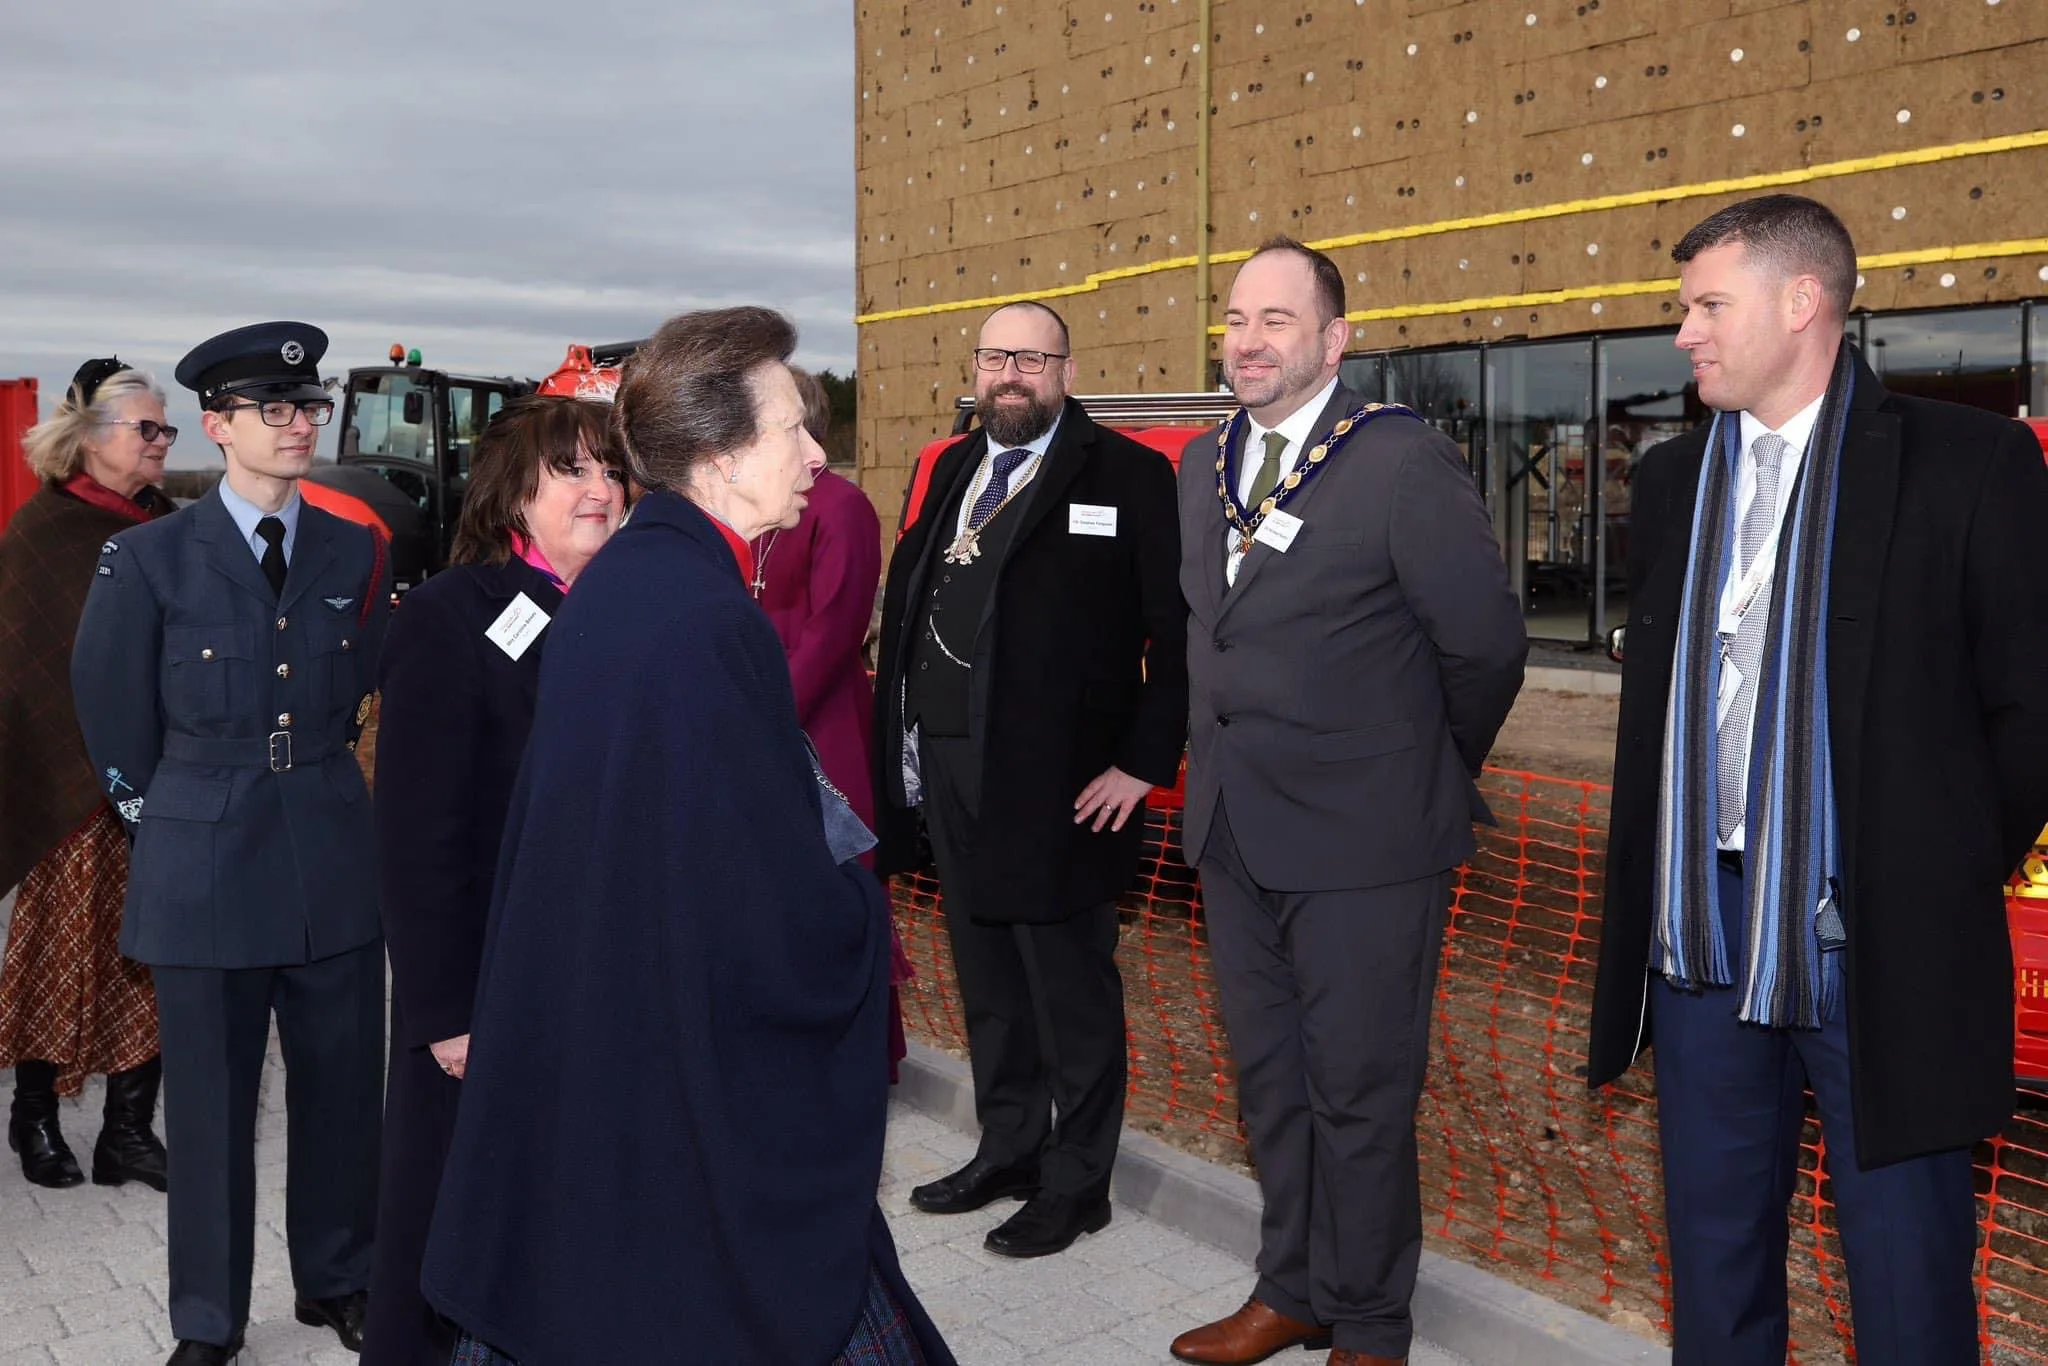 HRH the Princess Royal is patron of Magpas and on Friday popped in to Cambridgeshire to see progress on the charity’s new £7m HQ